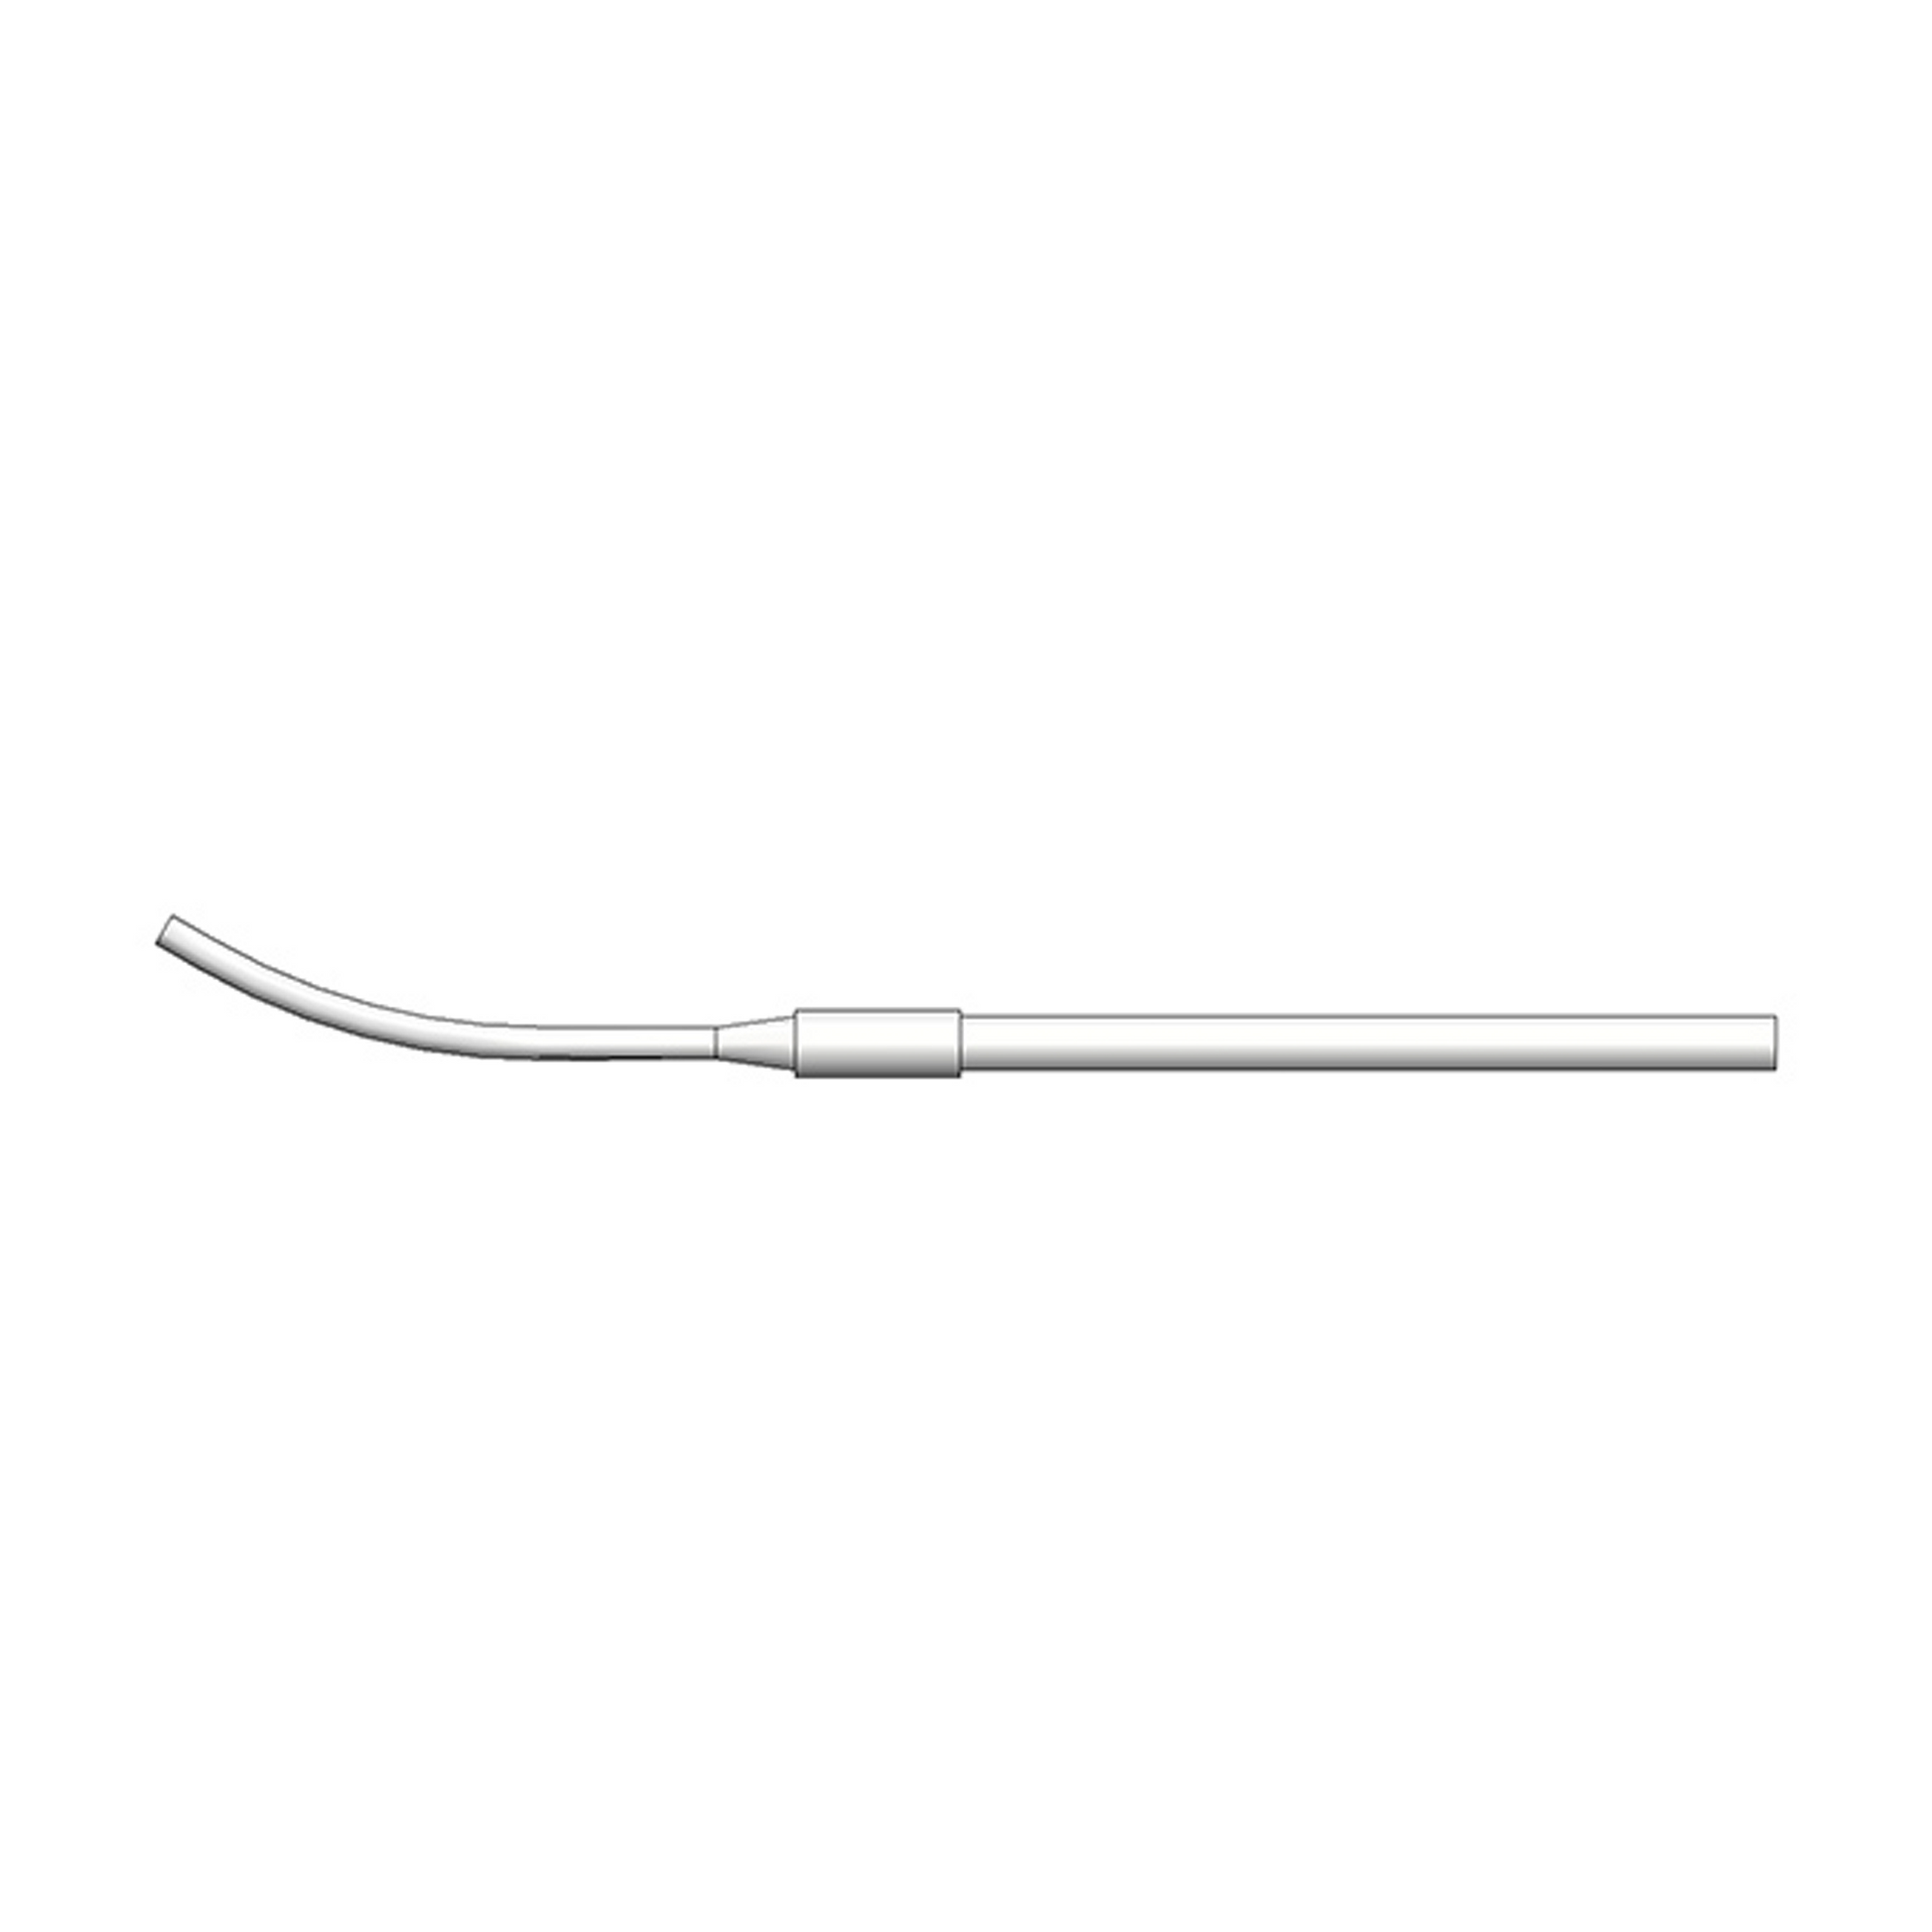 Hakko Products_ B5275 Feed pipe assembly 1.2mm_ Soldering Accessories_ Hakko Products